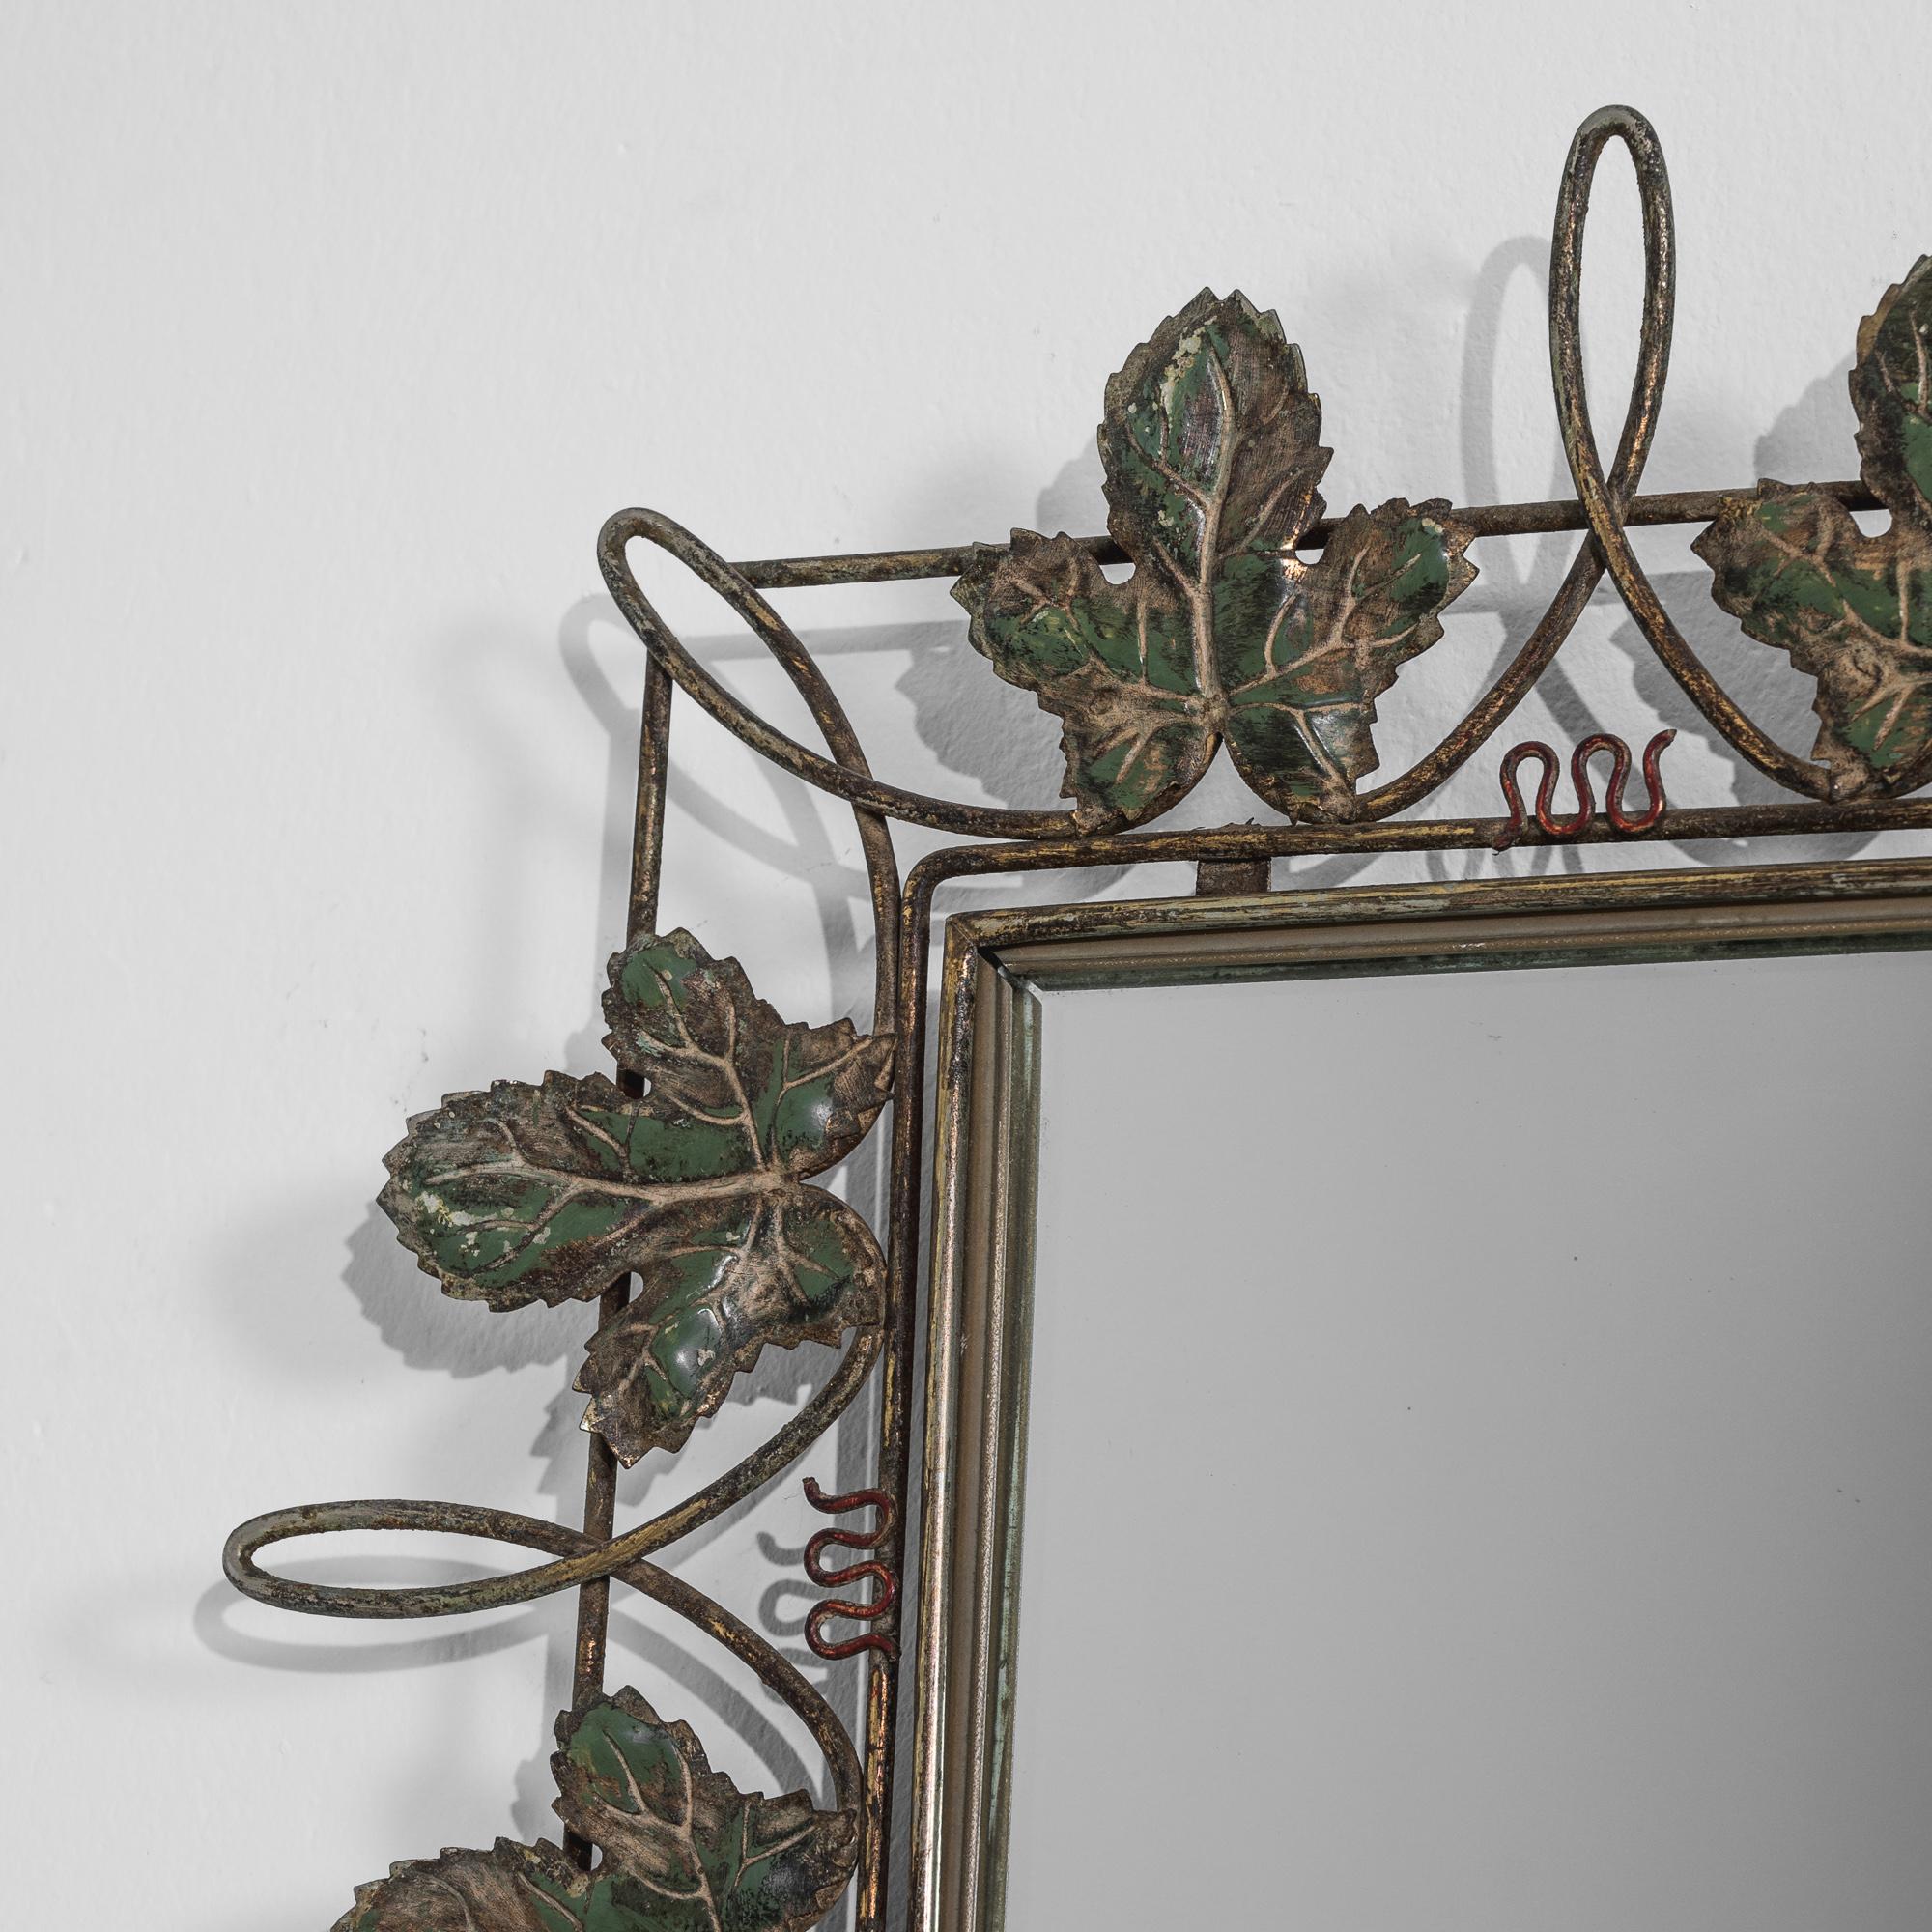 The vivacious design of this 20th century mirror evokes the green vineyards of the French countryside. A rectangular mirror is bordered by a design of veined leaves and looping vines; delicate metal squiggles suggest the inquisitive tendrils of new